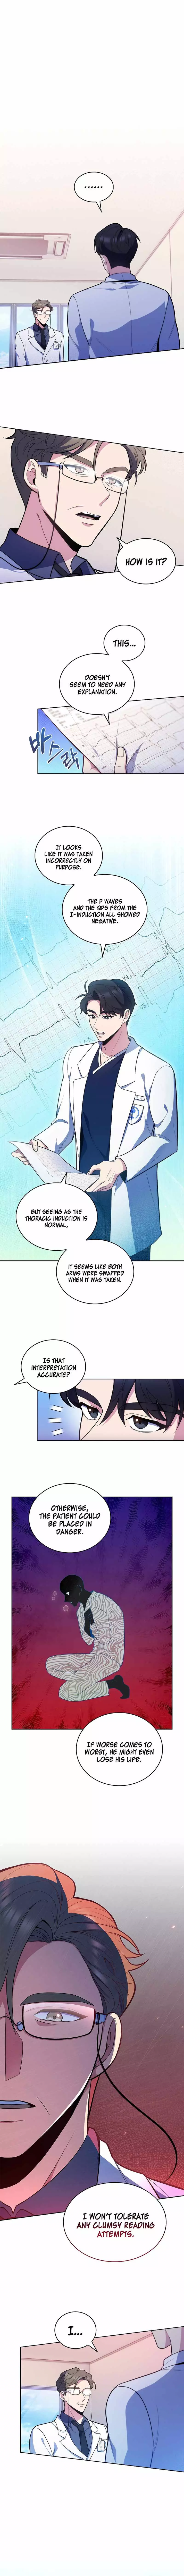 Level-Up Doctor (Manhwa) - 27 page 2-cf200362